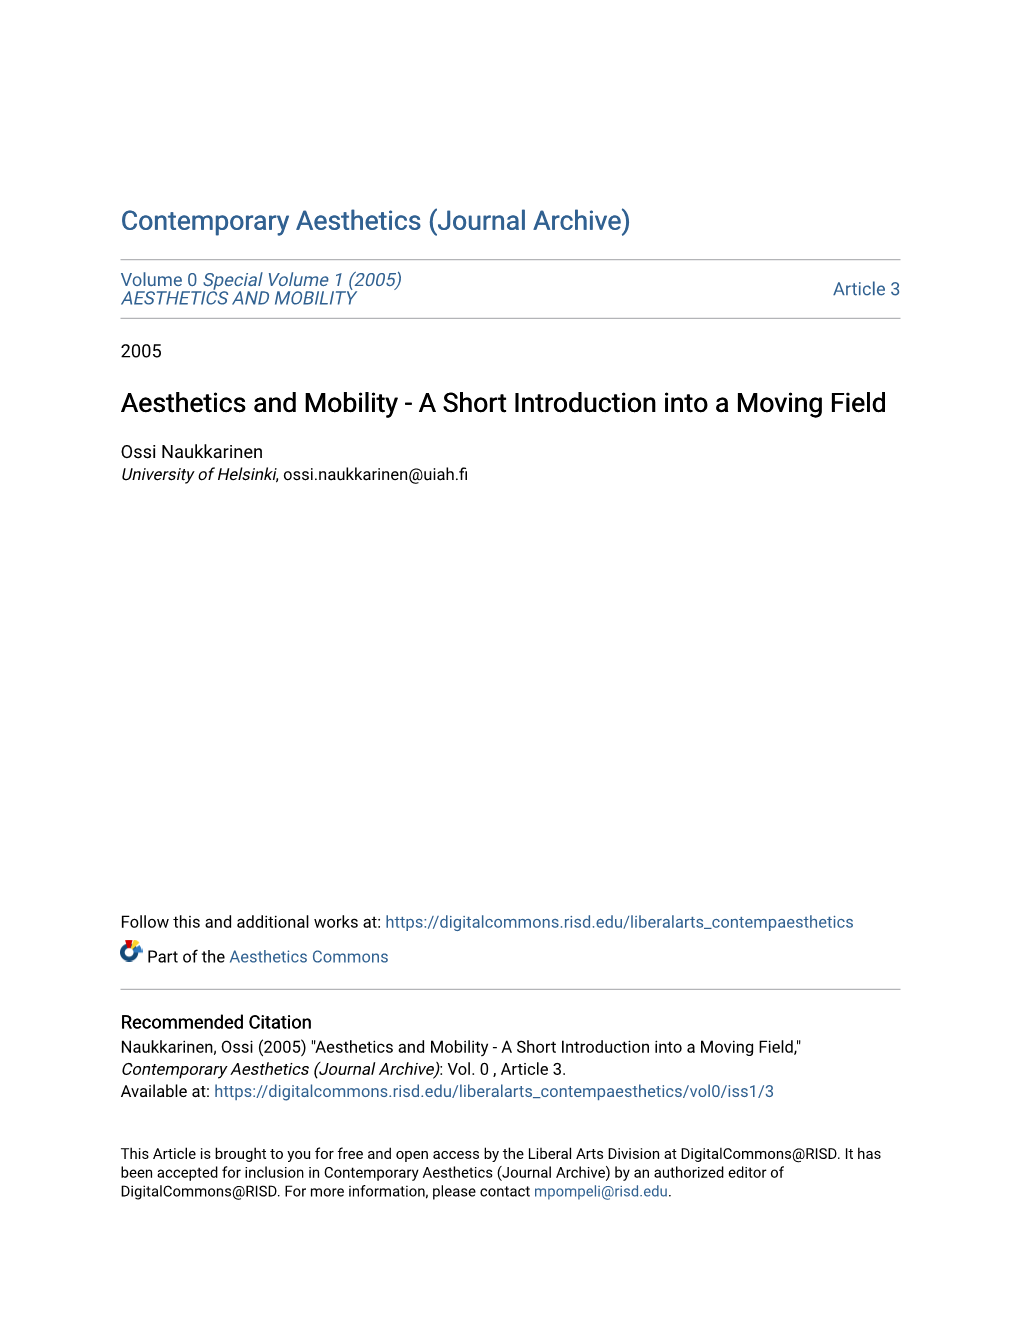 AESTHETICS and MOBILITY Article 3